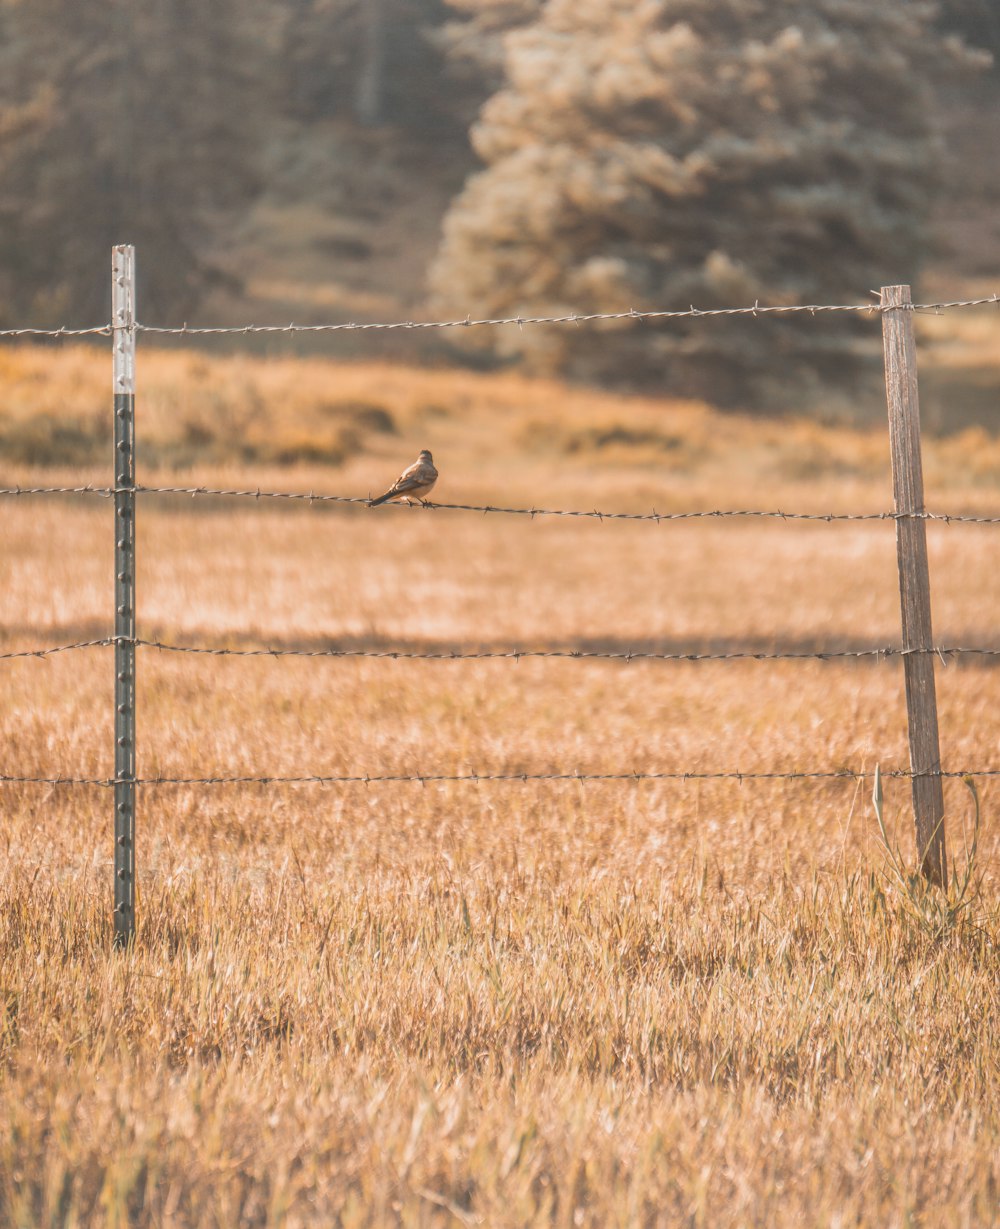 a bird sitting on a barbed wire fence